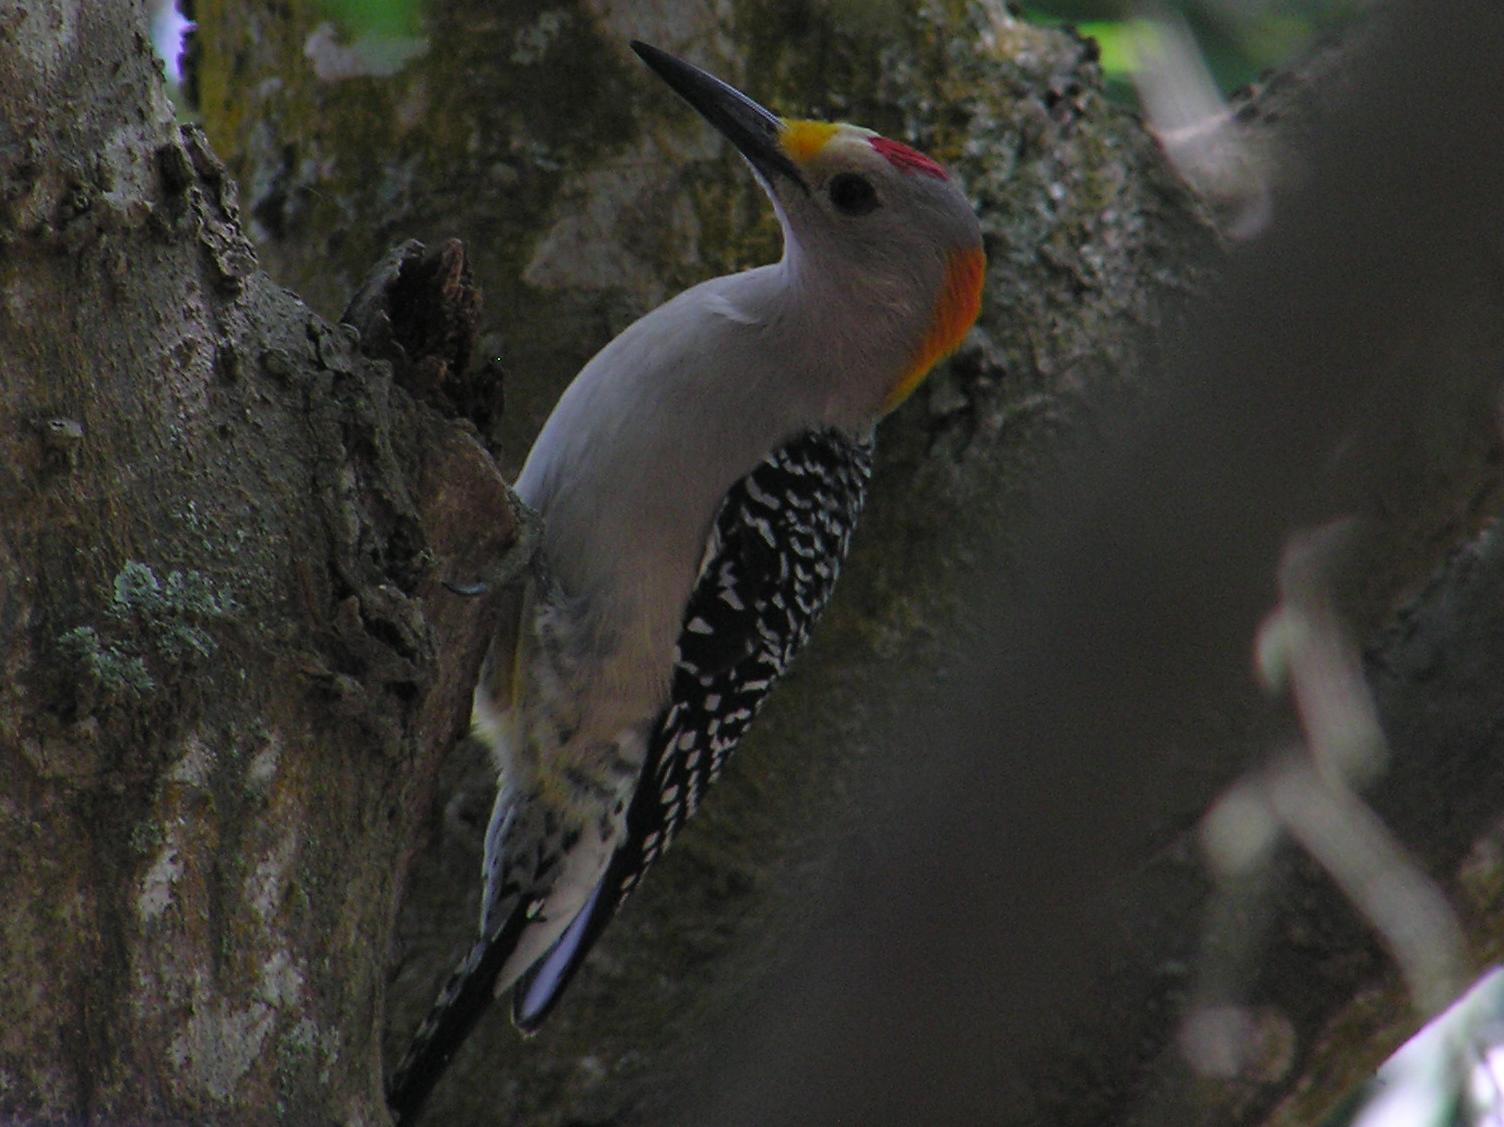 Click picture to see more Golden-fronted Woodpeckers.